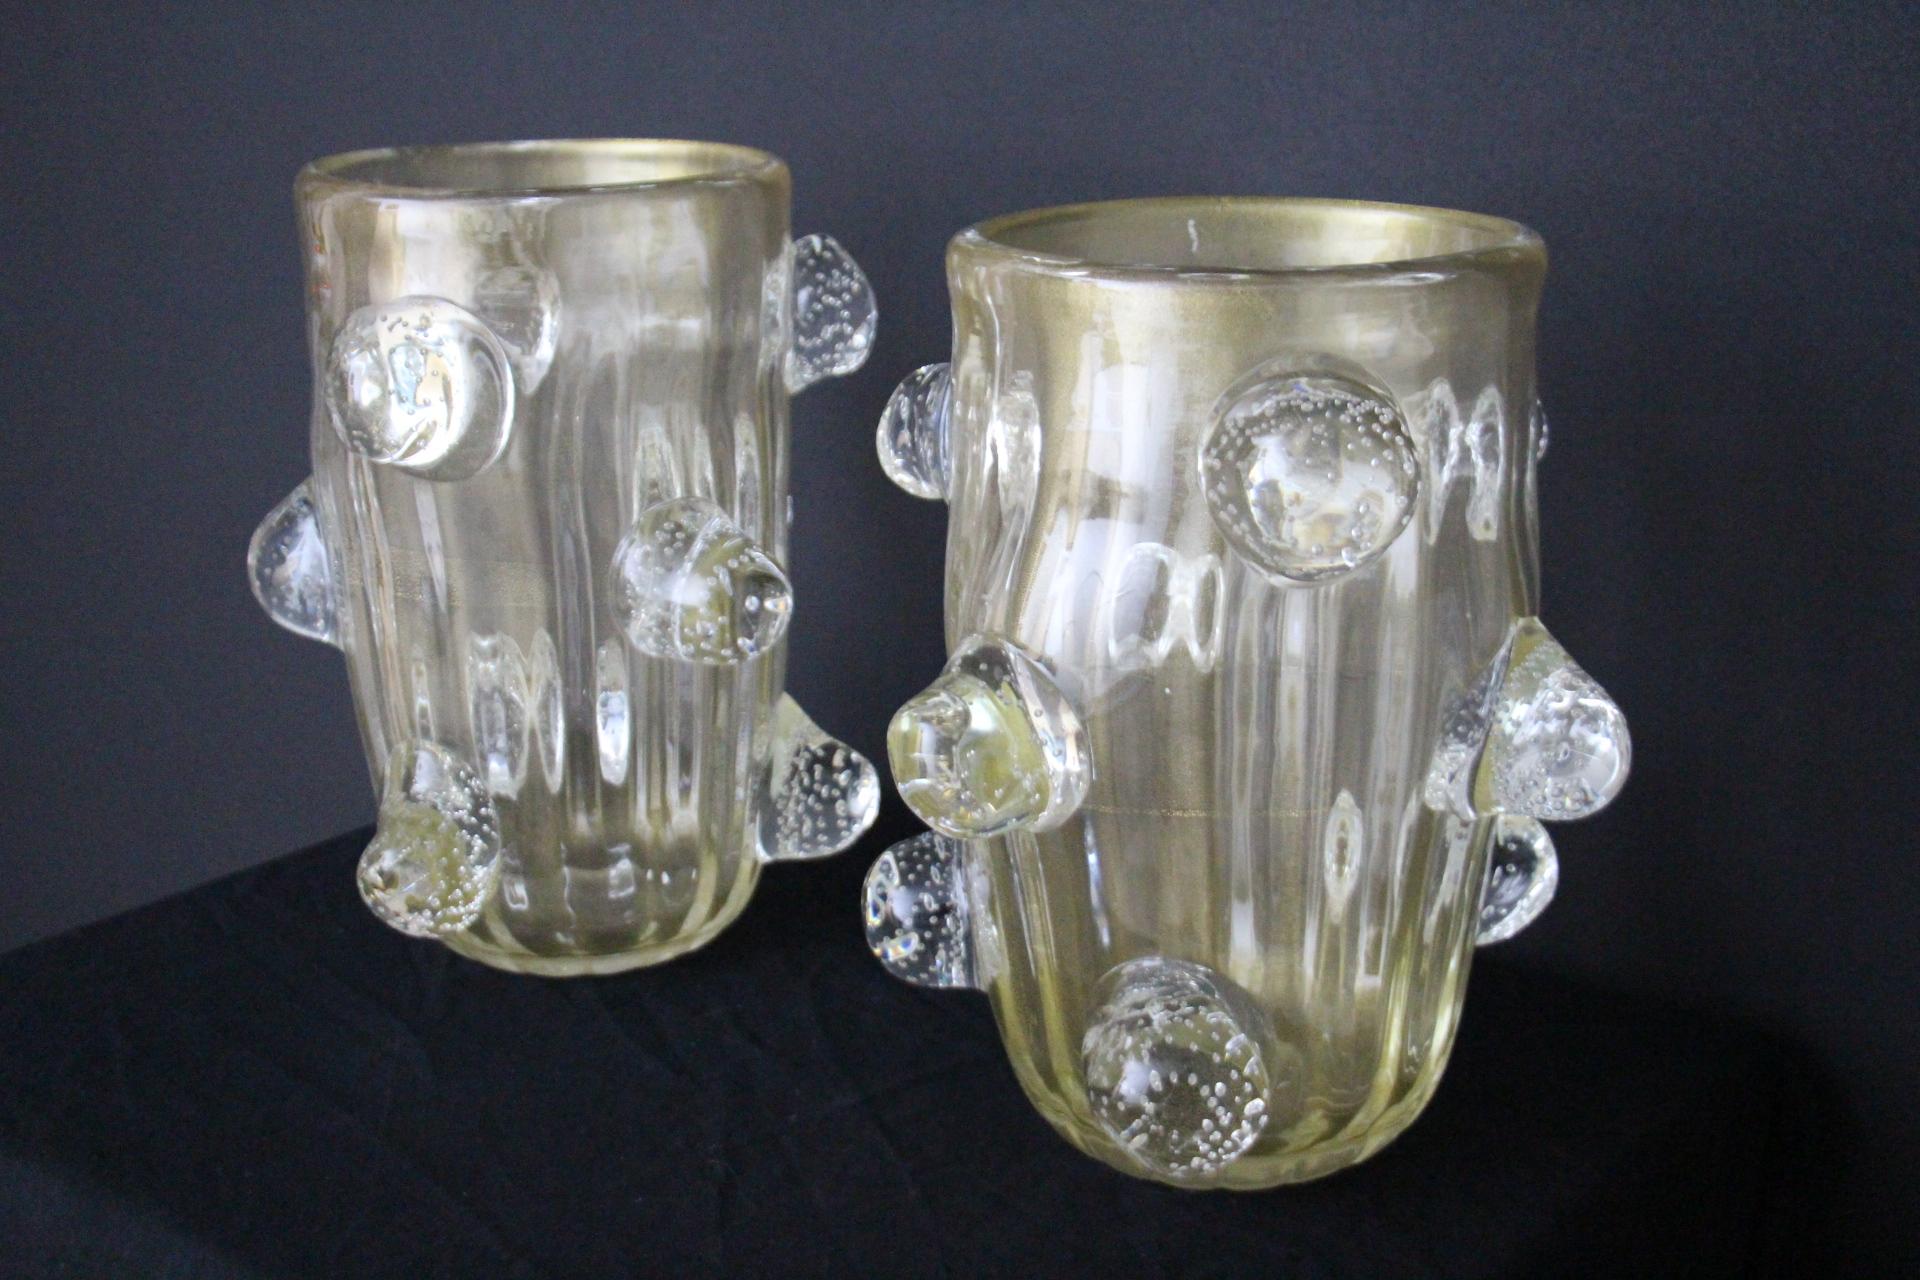 Pair of Large Golden Murano Glass Vases With Bubbles Balls Decor by Costantini For Sale 6